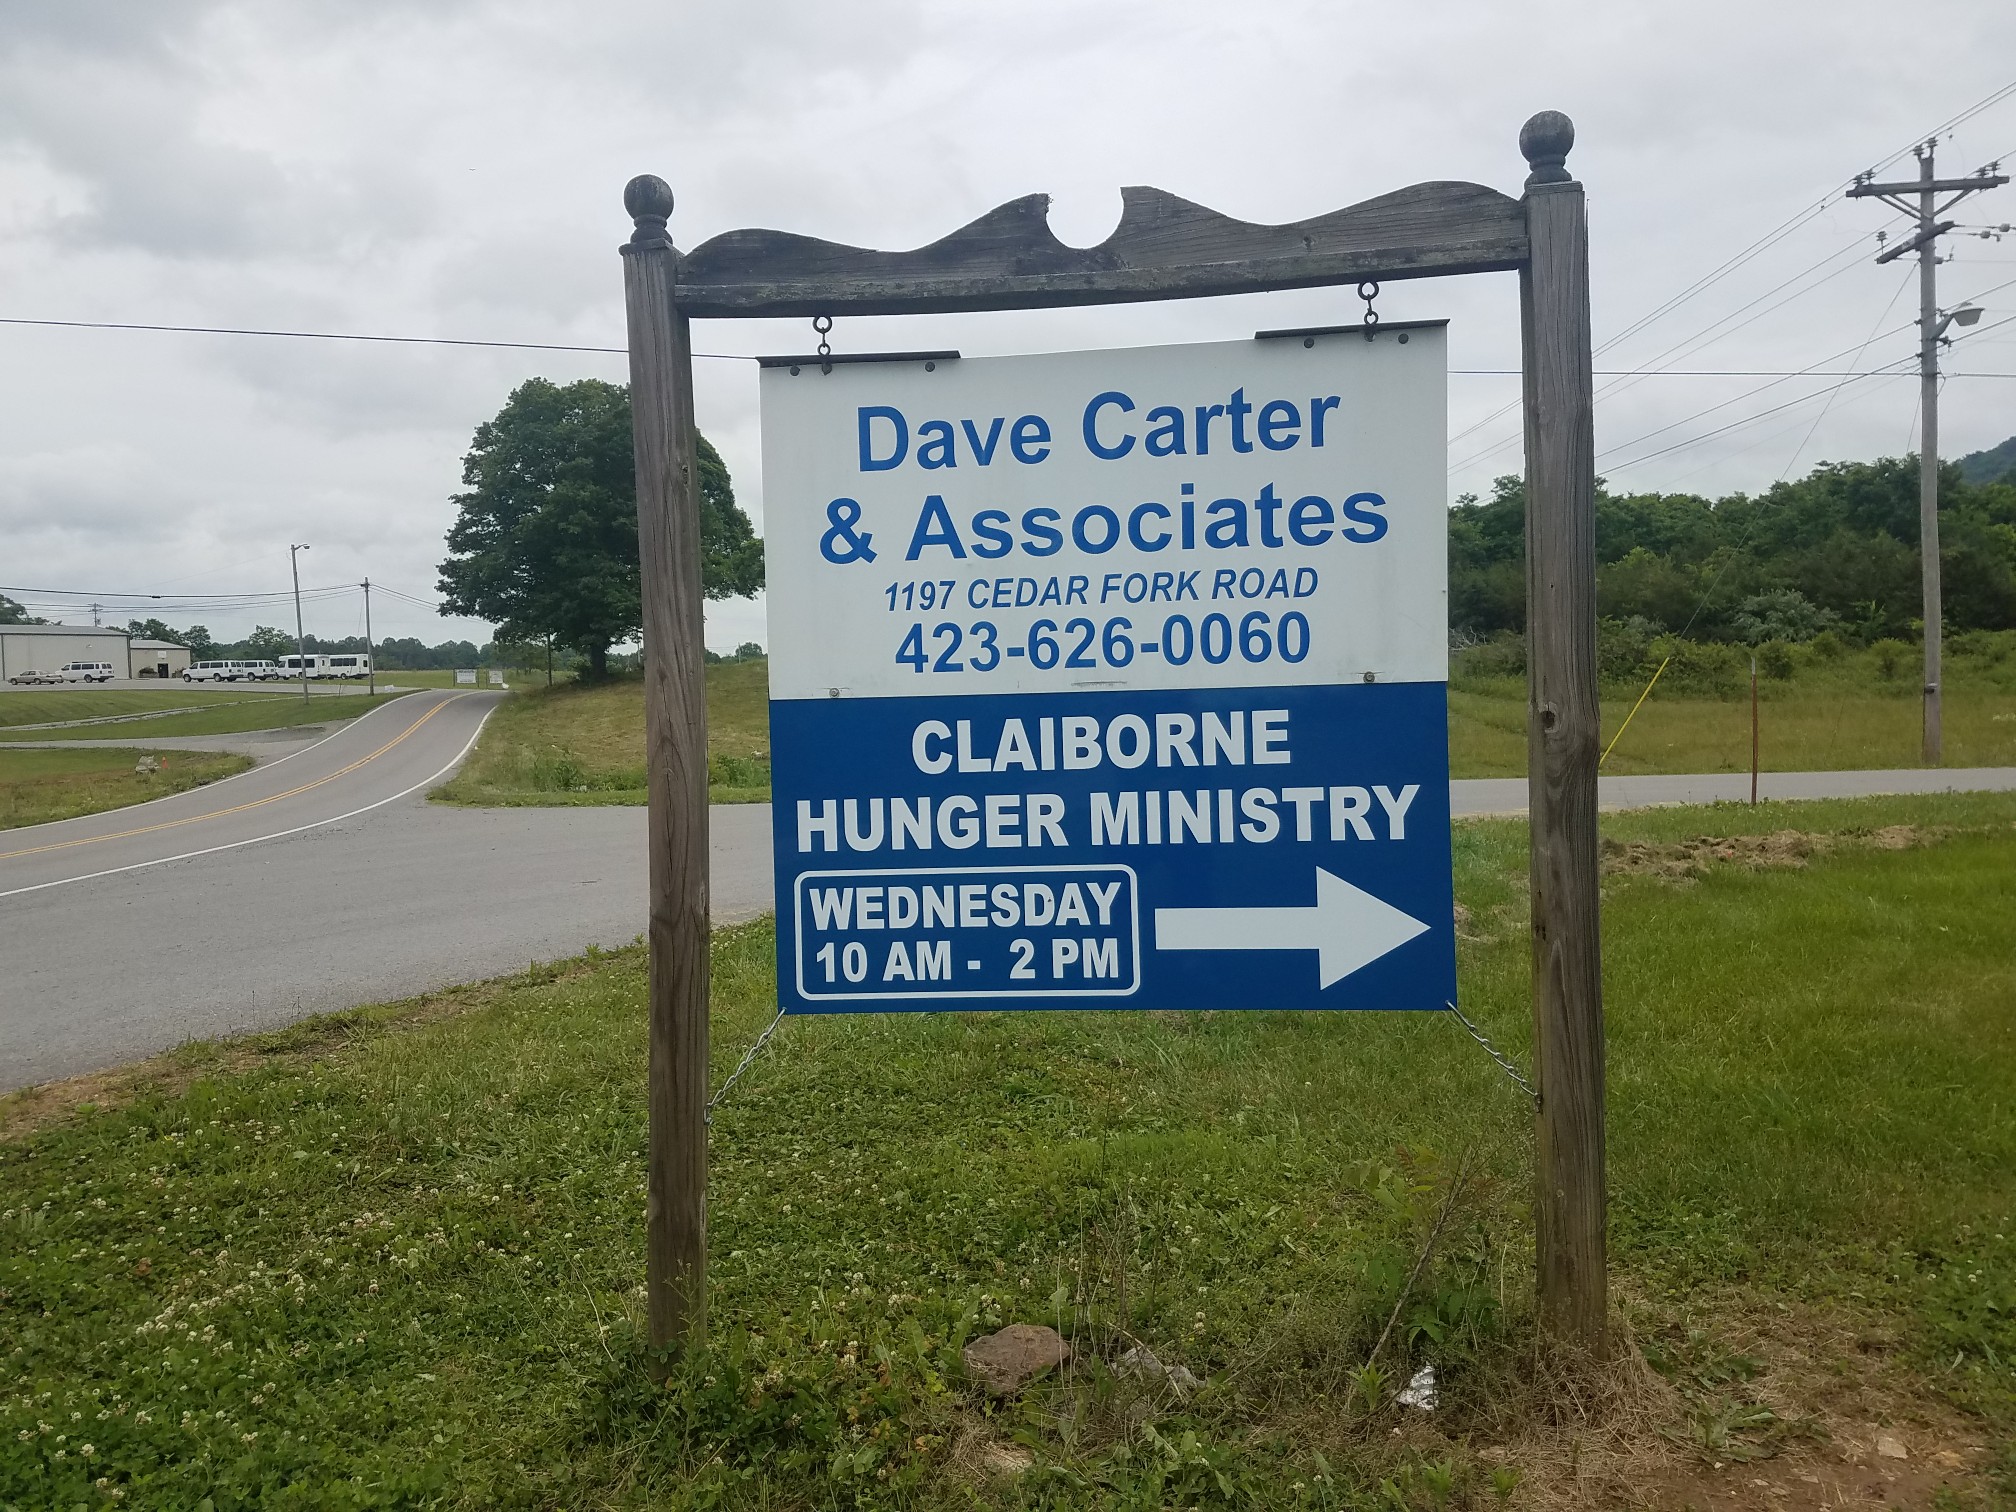 Claiborne Hunger Ministry Food Pantry